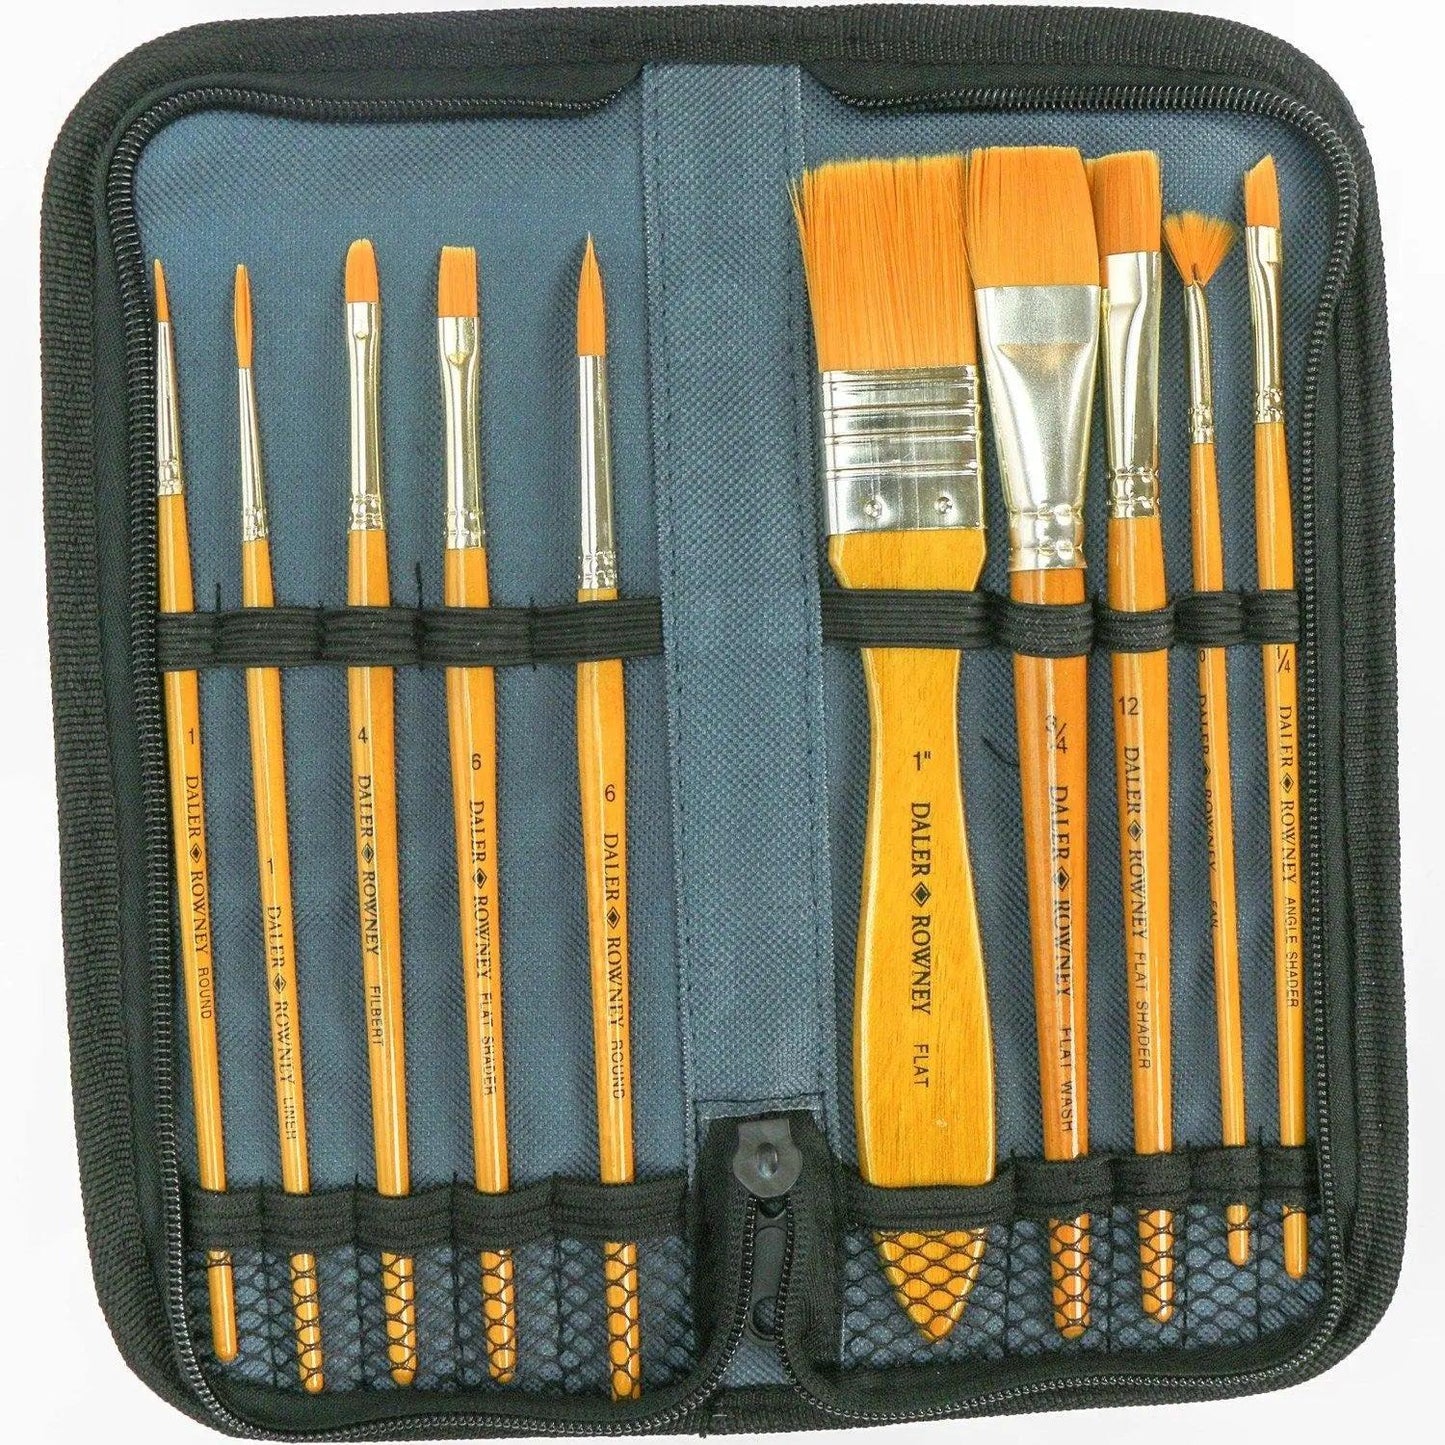 Daler Rowney Simply Gold Taklon Synthetic Hairs Brush Set of 10 Pcs With Zip Case. The Stationers